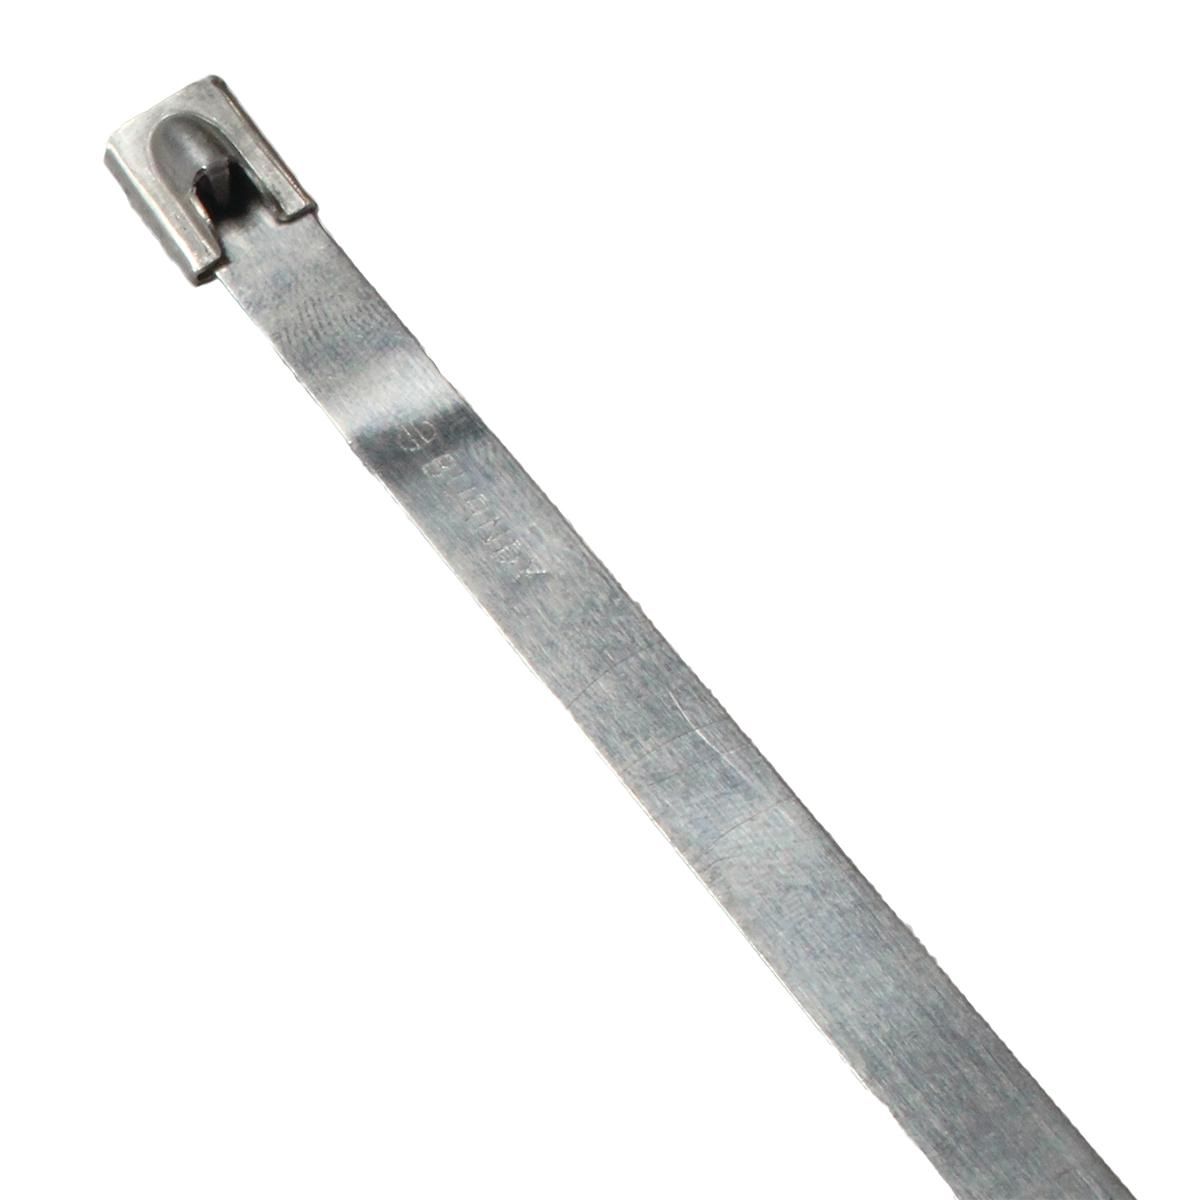 Hubbell CTSS900300304L Uncoated stainless steel cable ties 304 grade, Tensile strength: 920 Lb, 11.81" L, 0.62" W, 3.00" Bundle Dia.  ; Smooth, rounded edges help ensure safe, efficient handling ; Ergonomically designed installation tools consistently tensions and cuts off ties